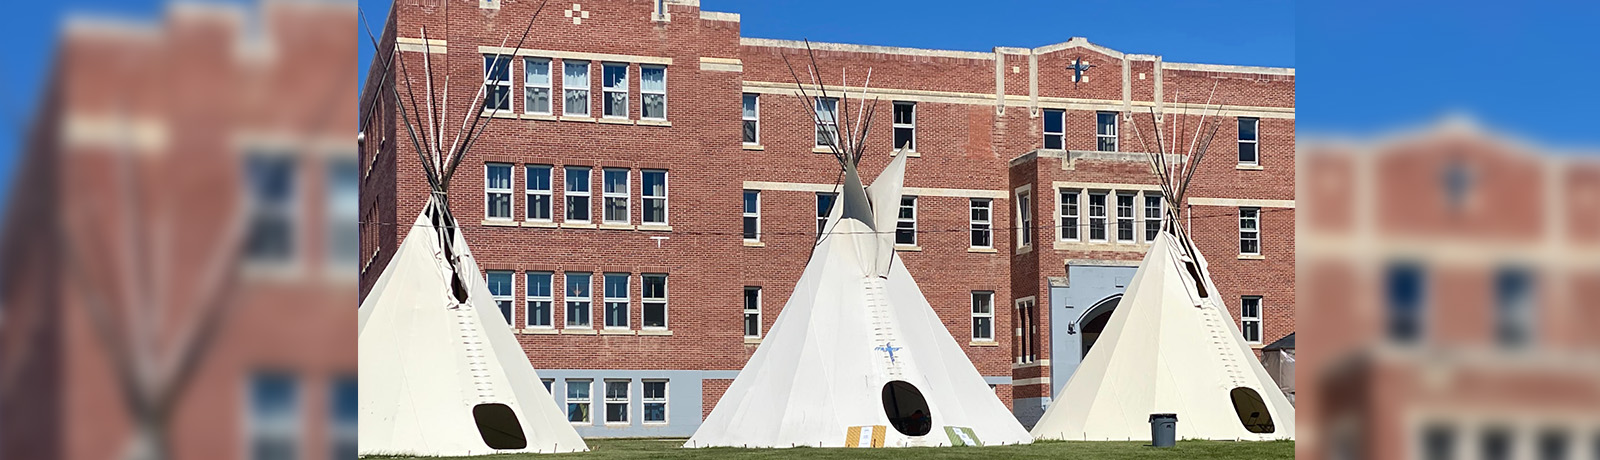 Ceremonial tipis sit in front of the former residential school, Blue Quills.